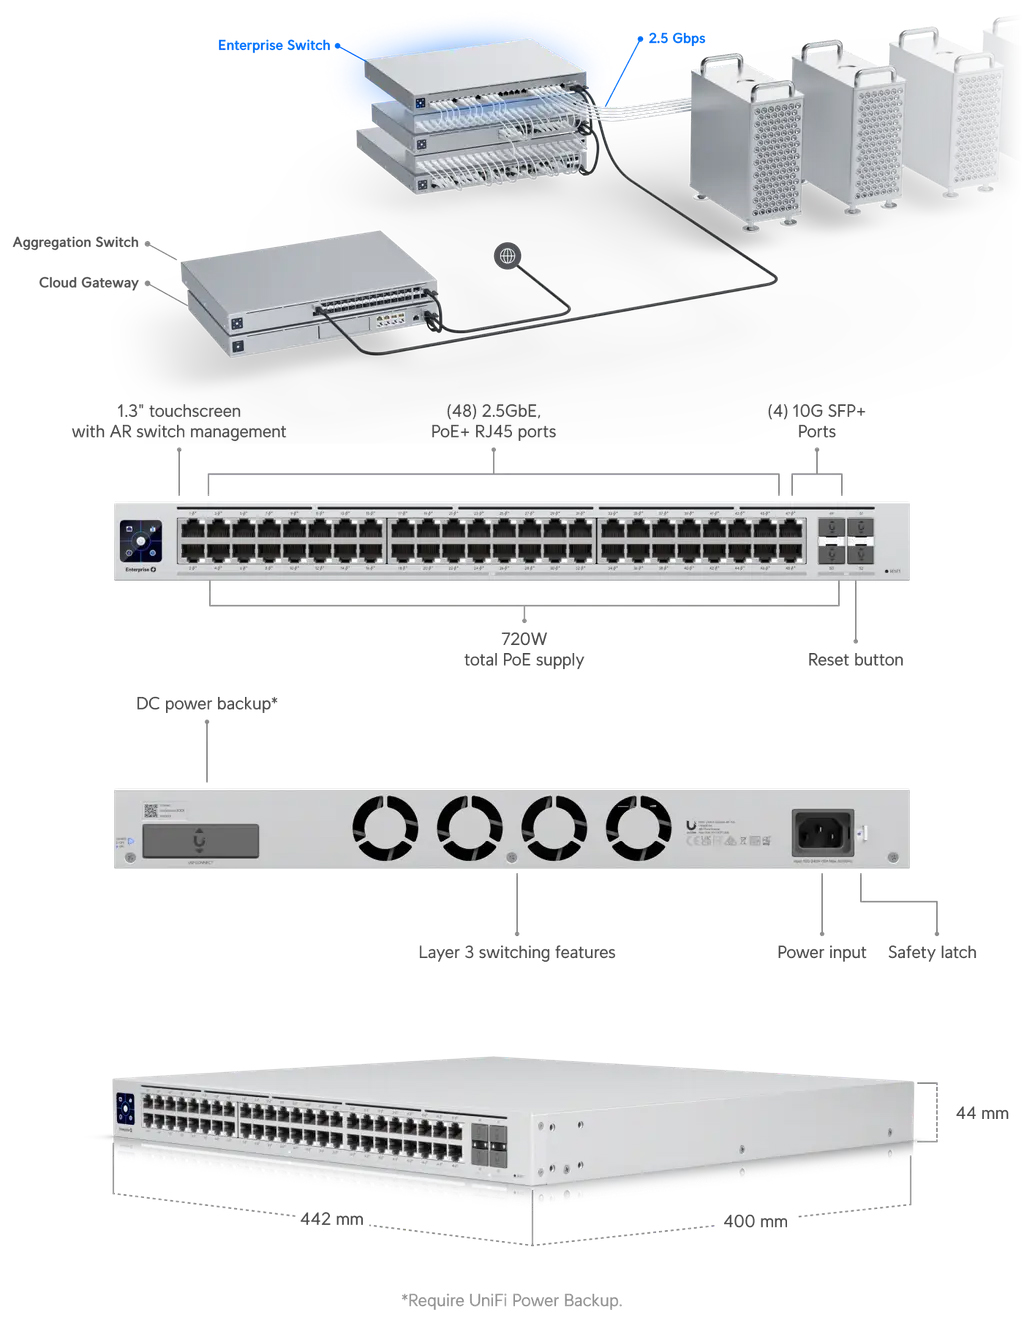 Switches-Ubiquiti-48-port-Layer-3-switch-with-2-5-GbE-PoThe-Switch-Enterprise-USW-ENTERPRISE-48-POE-1